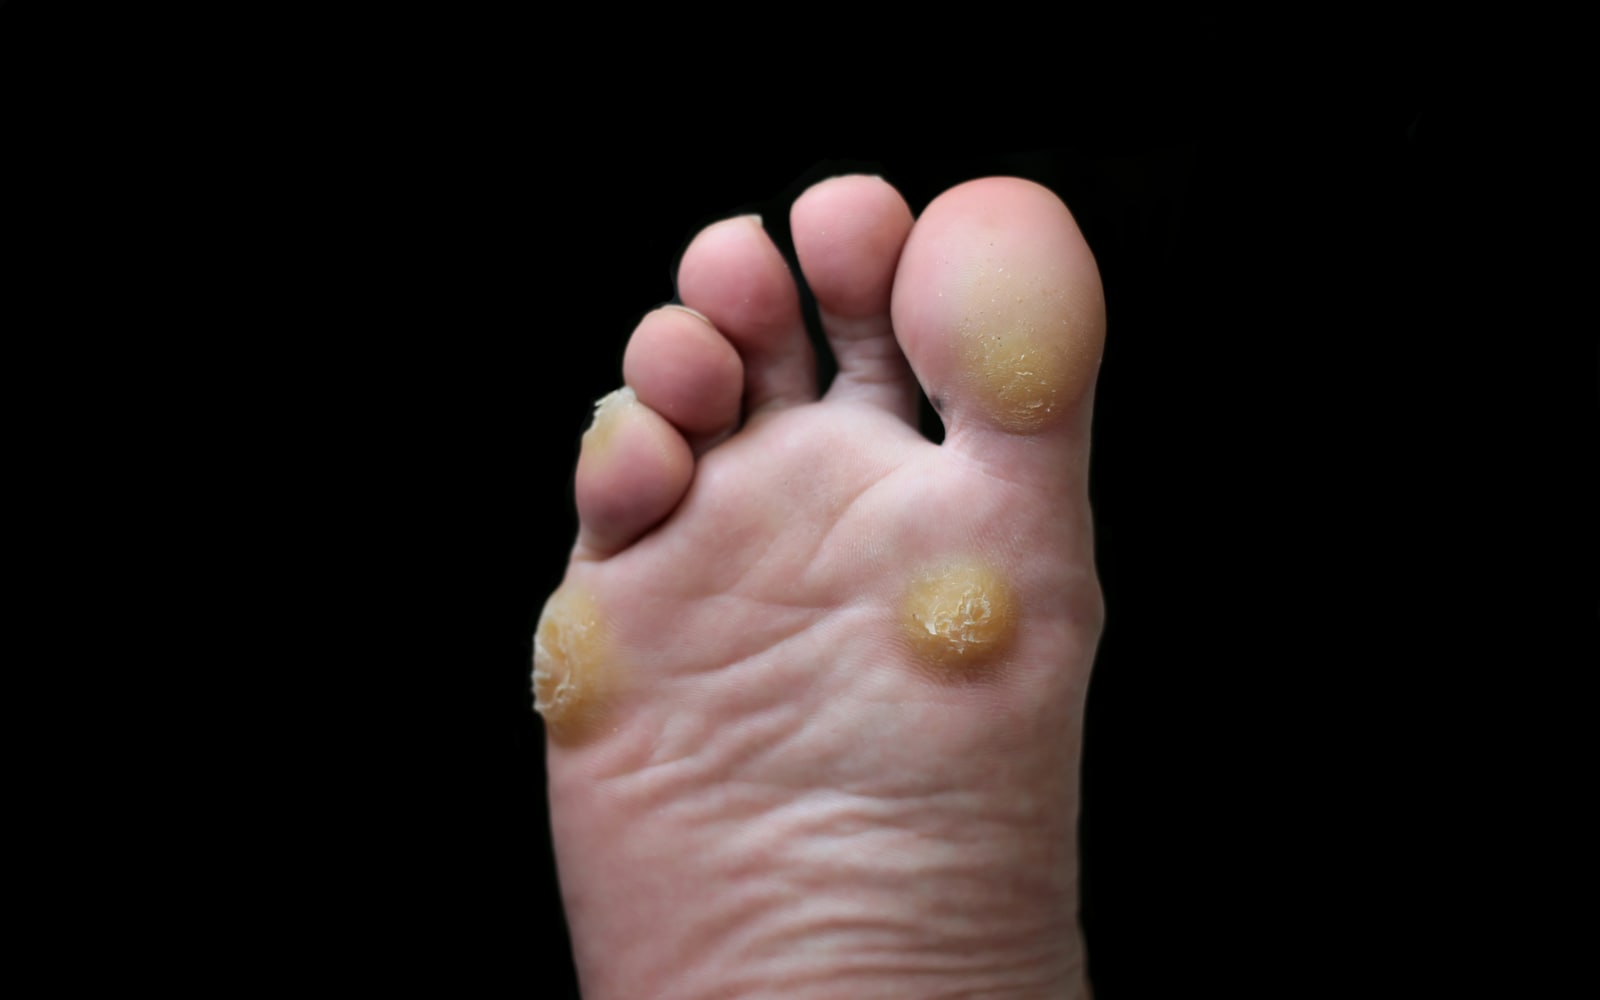 A foot with prominent corns